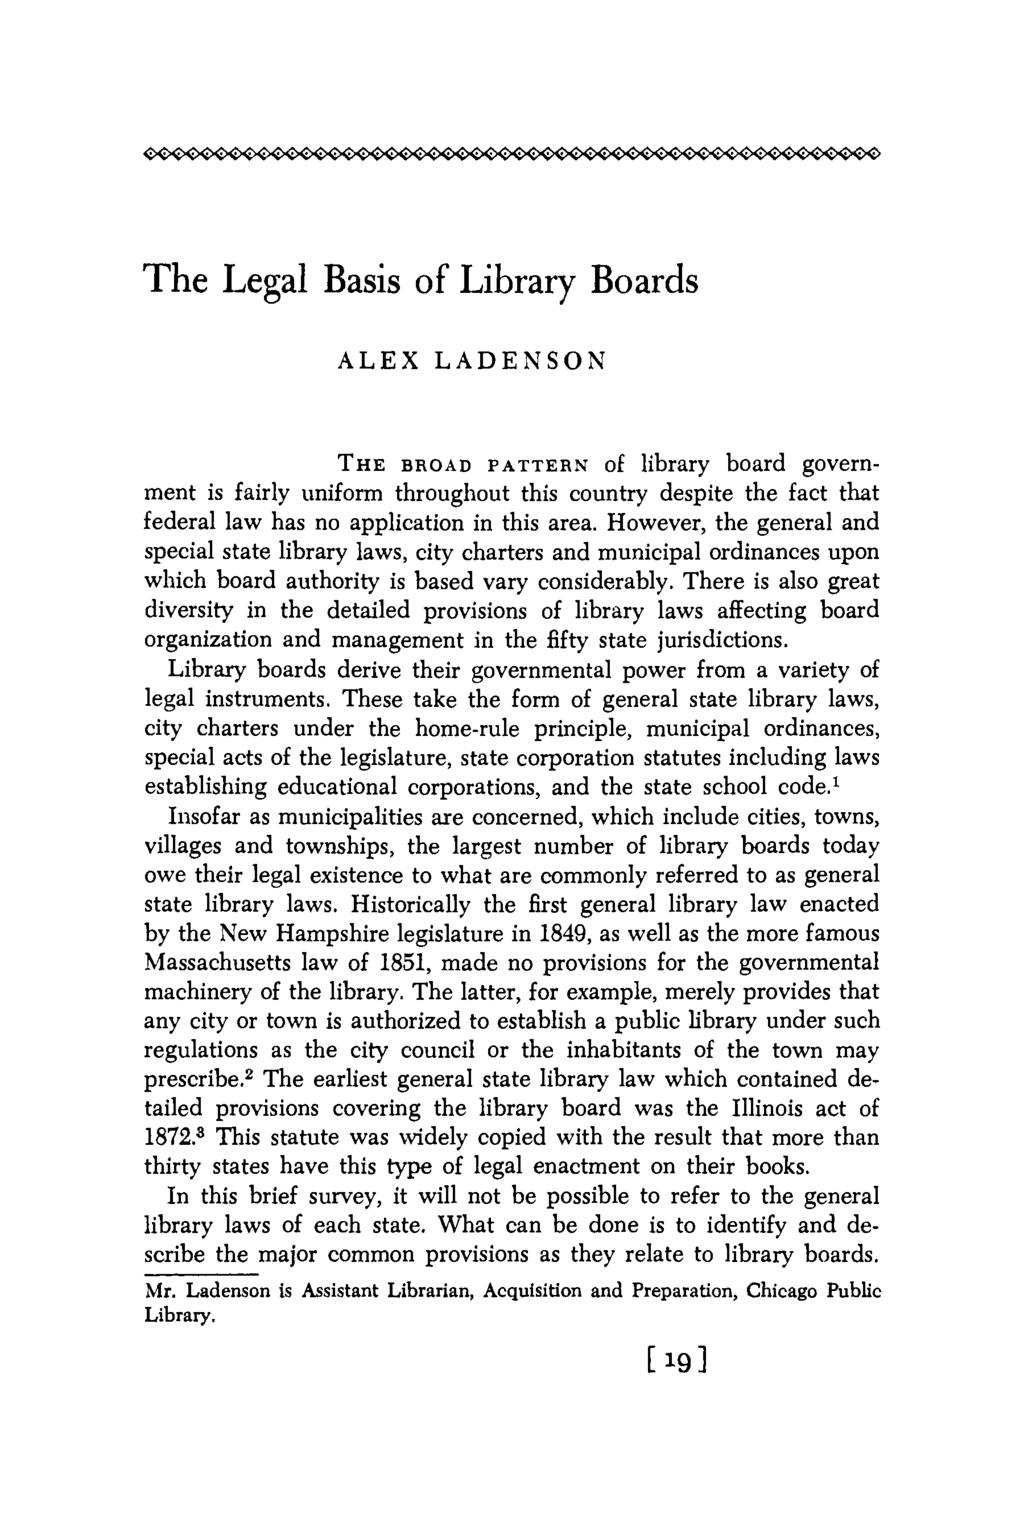 THE BROAD PATTERN of library board government is fairly uniform throughout this country despite the fact that federal law has no application in this area.